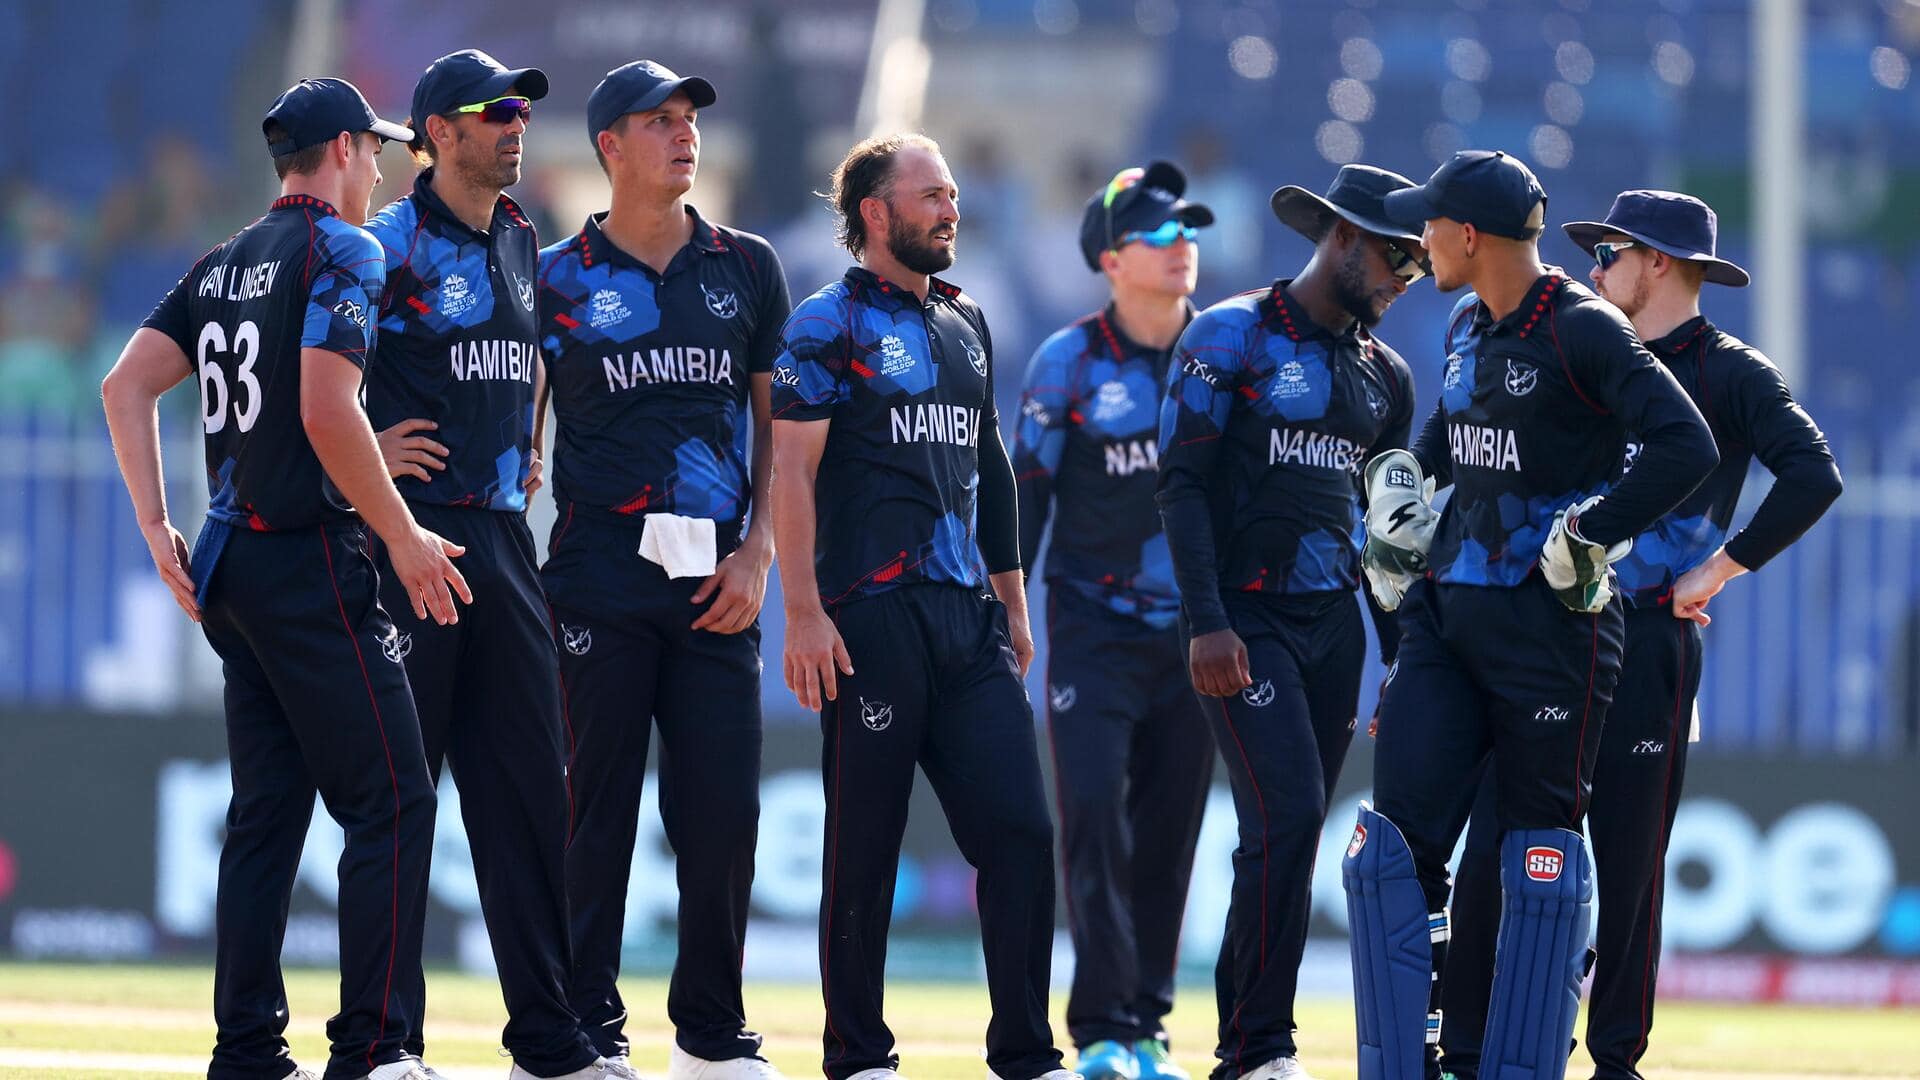 Namibia qualify for their third consecutive T20 World Cup: Stats